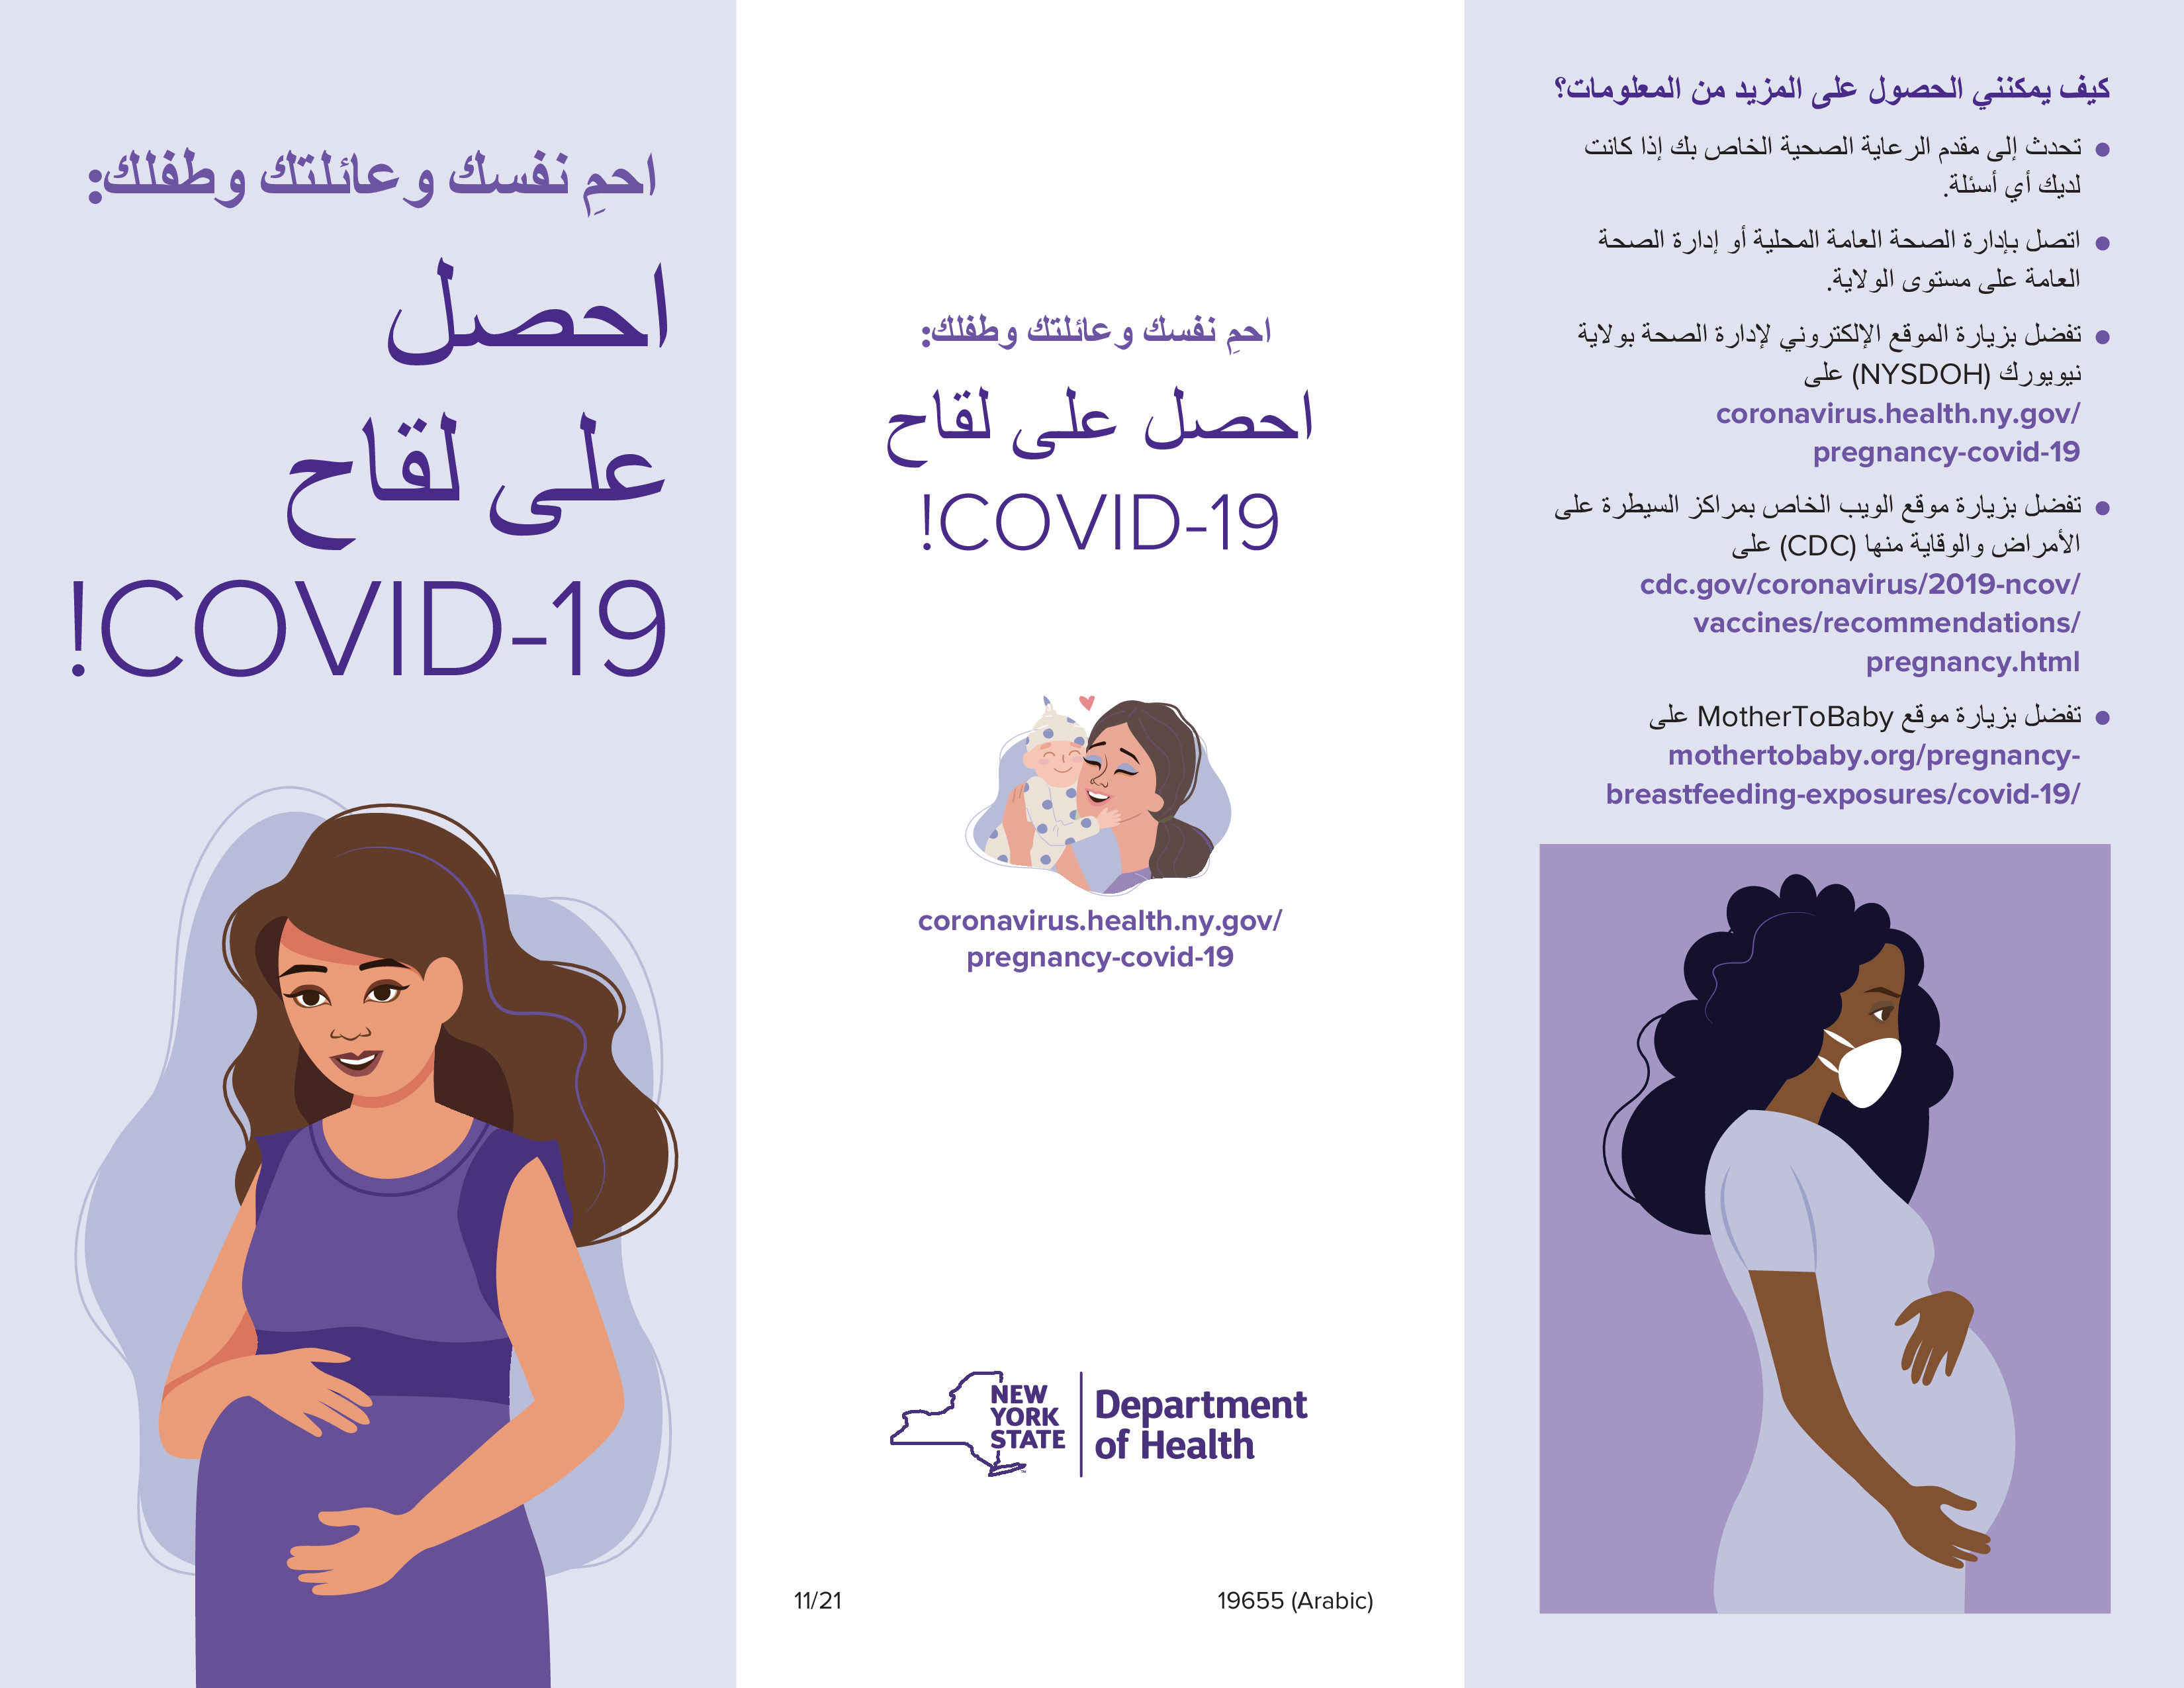 Pamphlet shows through panels with text and images. The first has a purple background and an African American woman wearing a mask. The second panel has a white background and an image of a mother embracing her baby. The final panel has the title, and a white woman smiling.